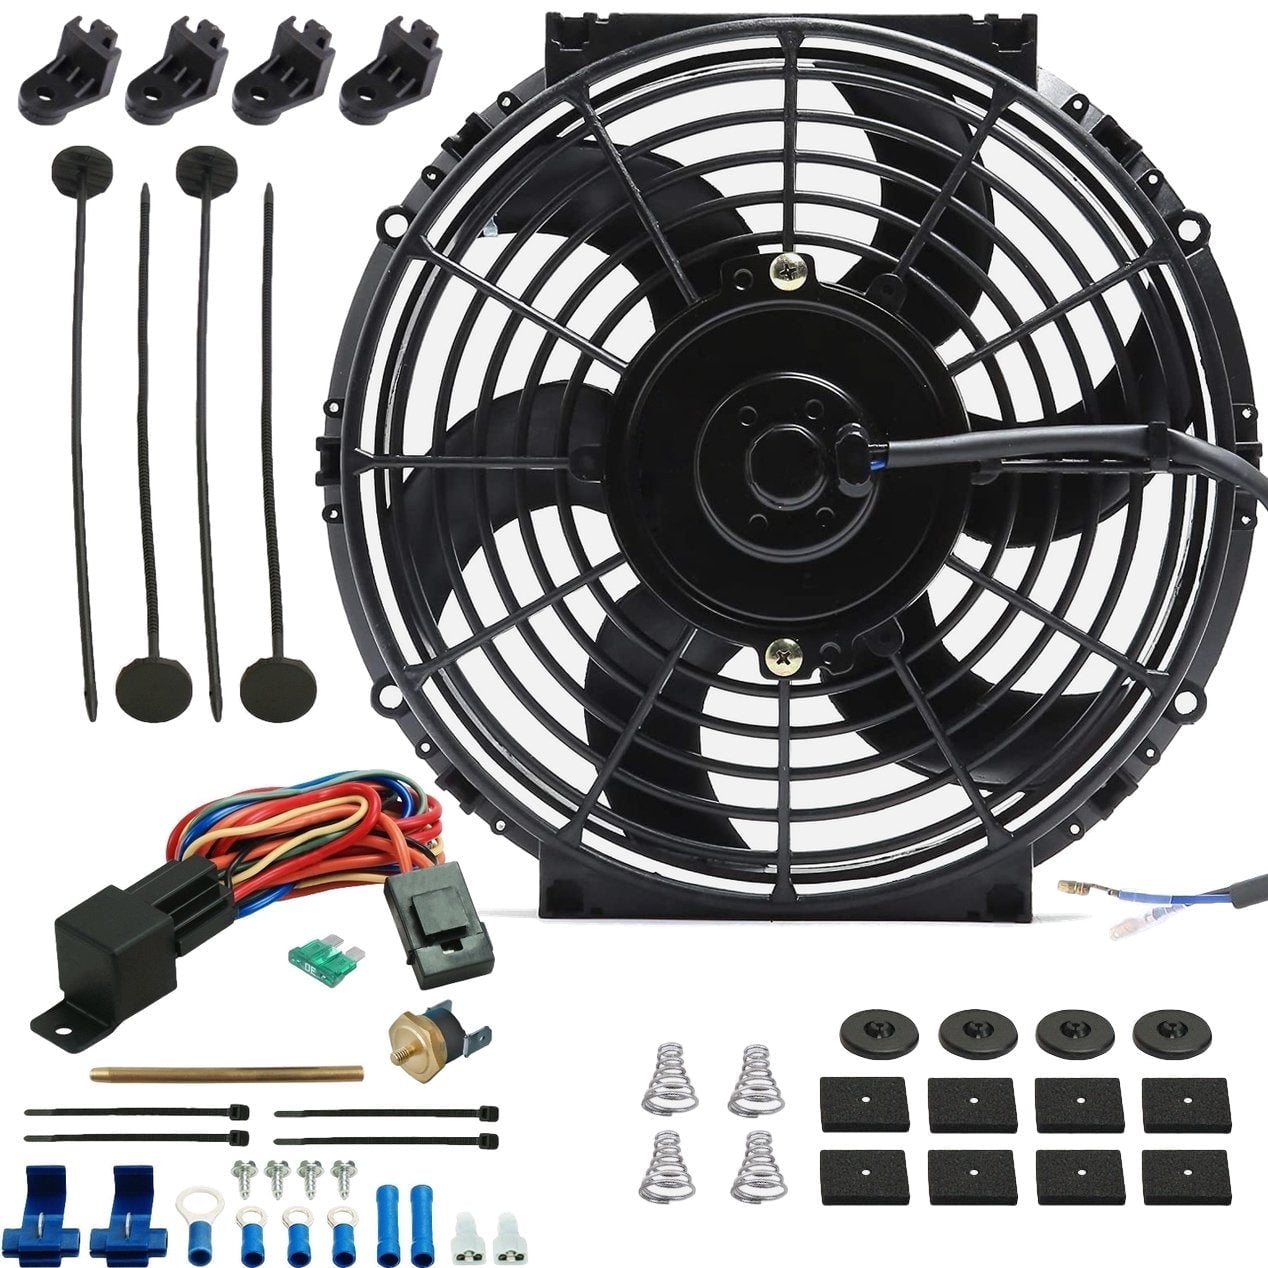 160F On - 145F Off American Volt Heavy Duty 11 Transmission Oil Cooler 9 Inch Electric Fan & Push-in Probe Thermostat Switch Kit 